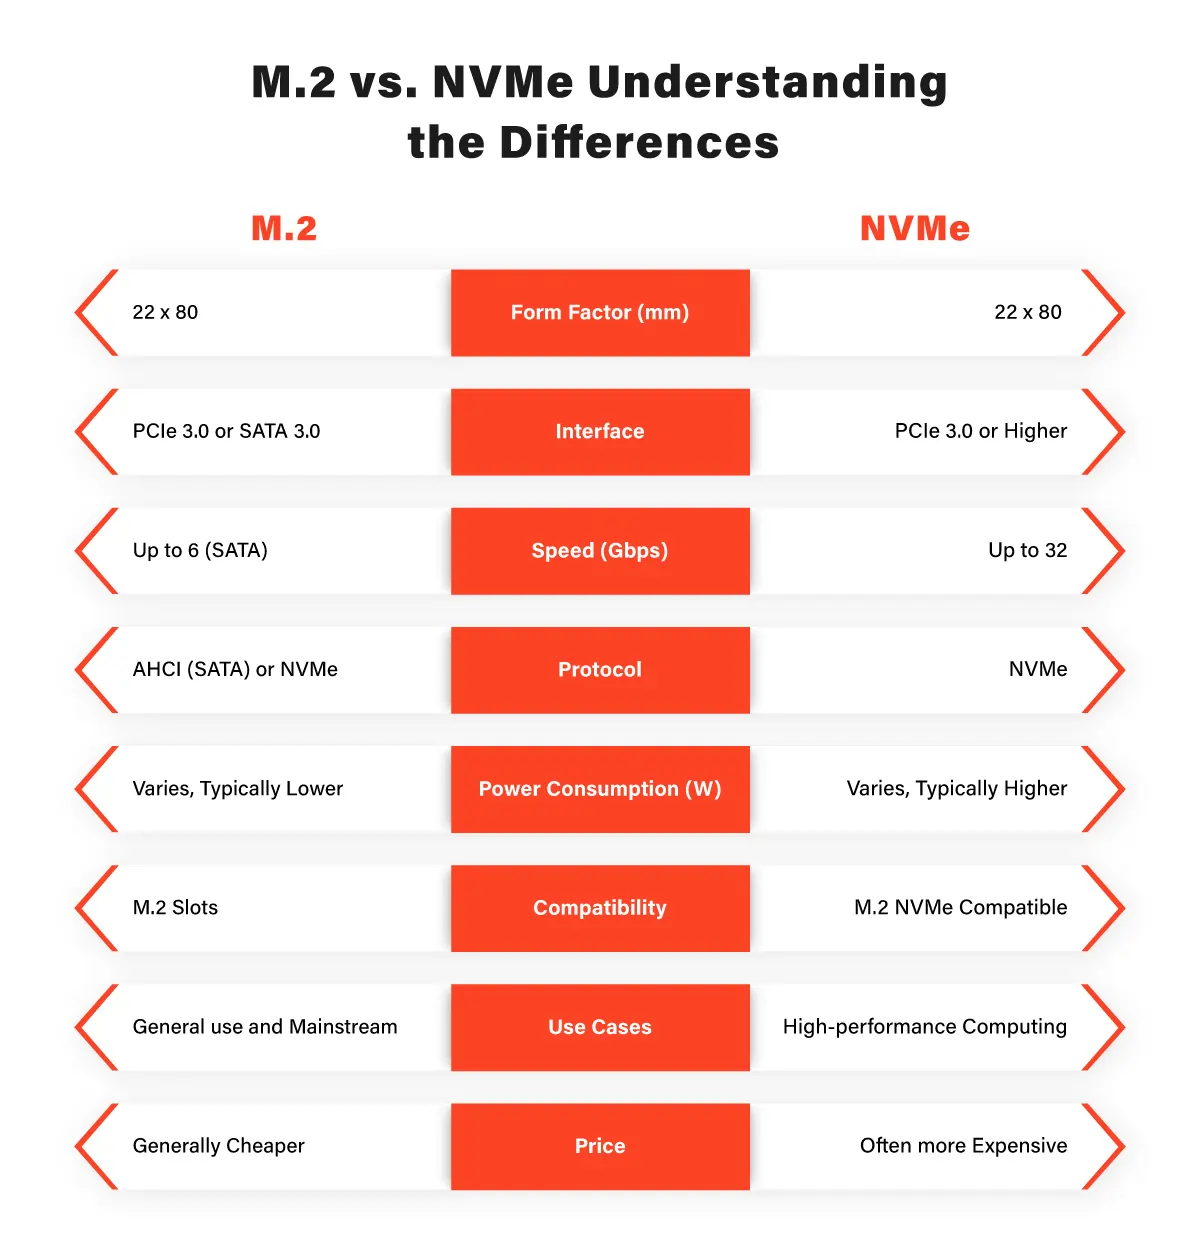 M.2 vs. NVMe Understanding the Differences